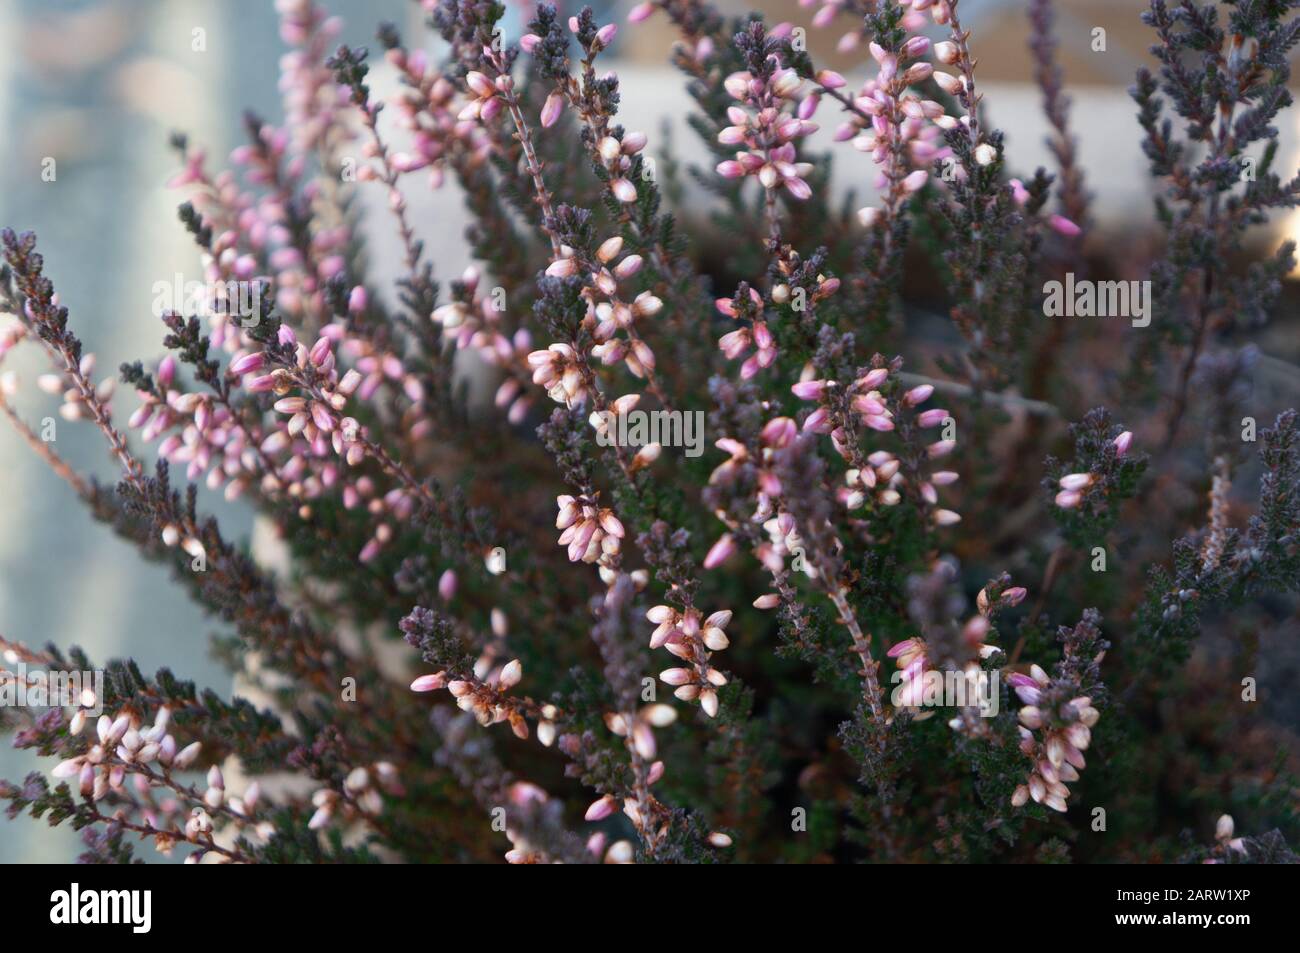 Clusters of small pink flower buds shot close up on deep green spinke branches in spring. Soft cool toned with romantic and loving feelings Stock Photo